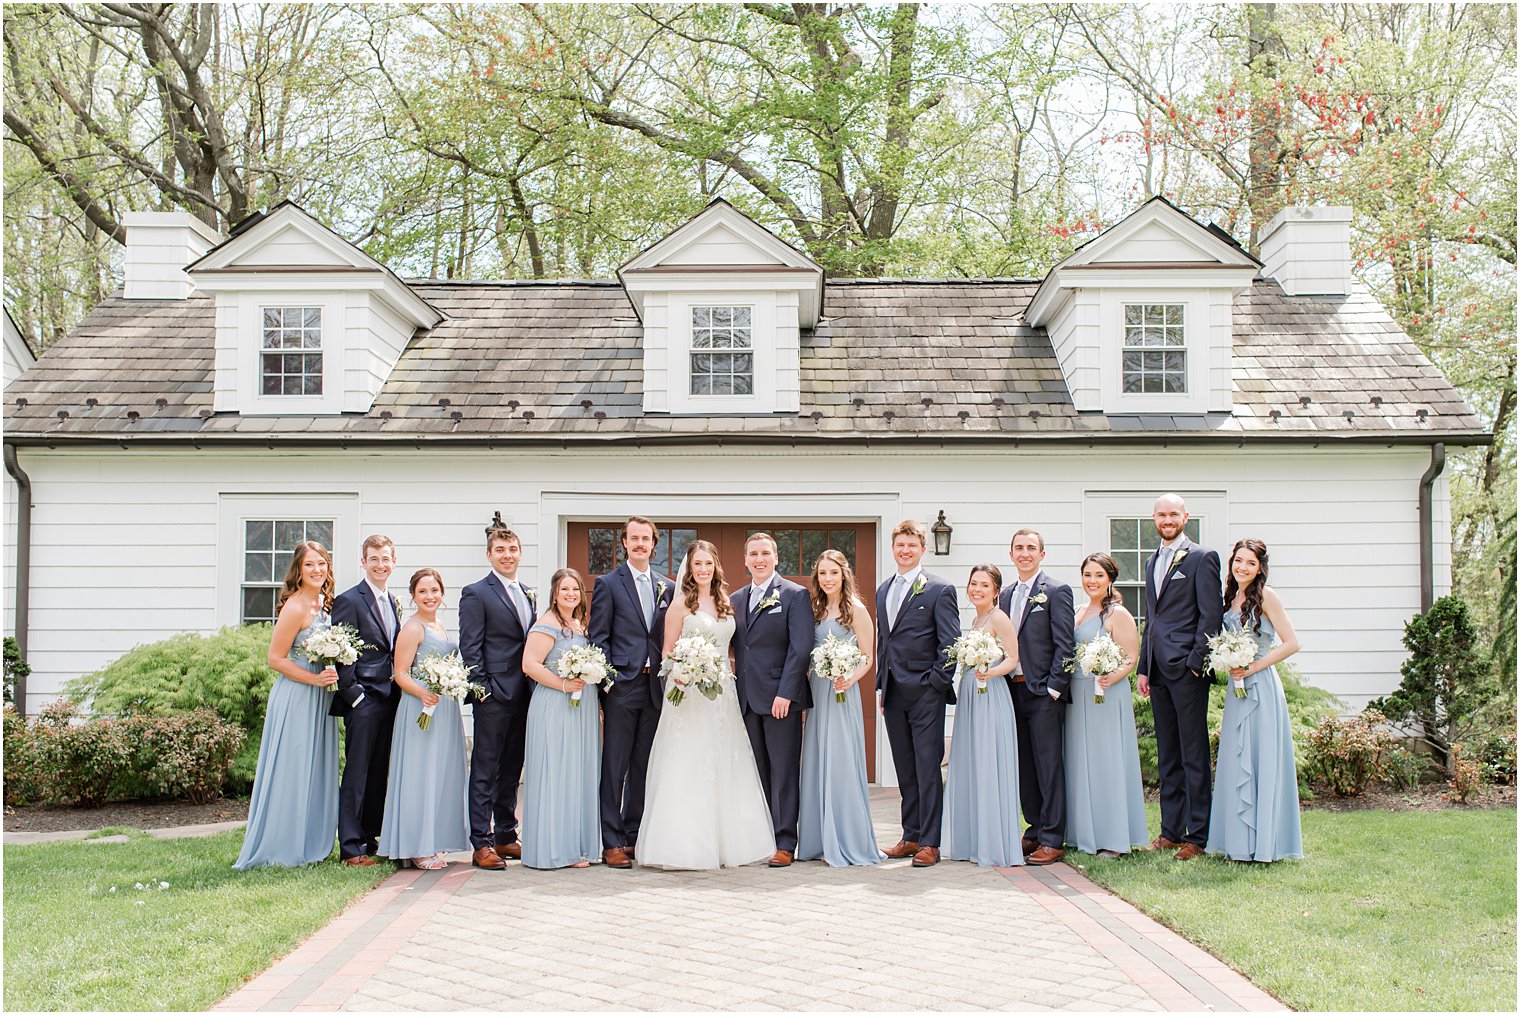 bride and groom stand with wedding party in blue and navy attire at The English Manor